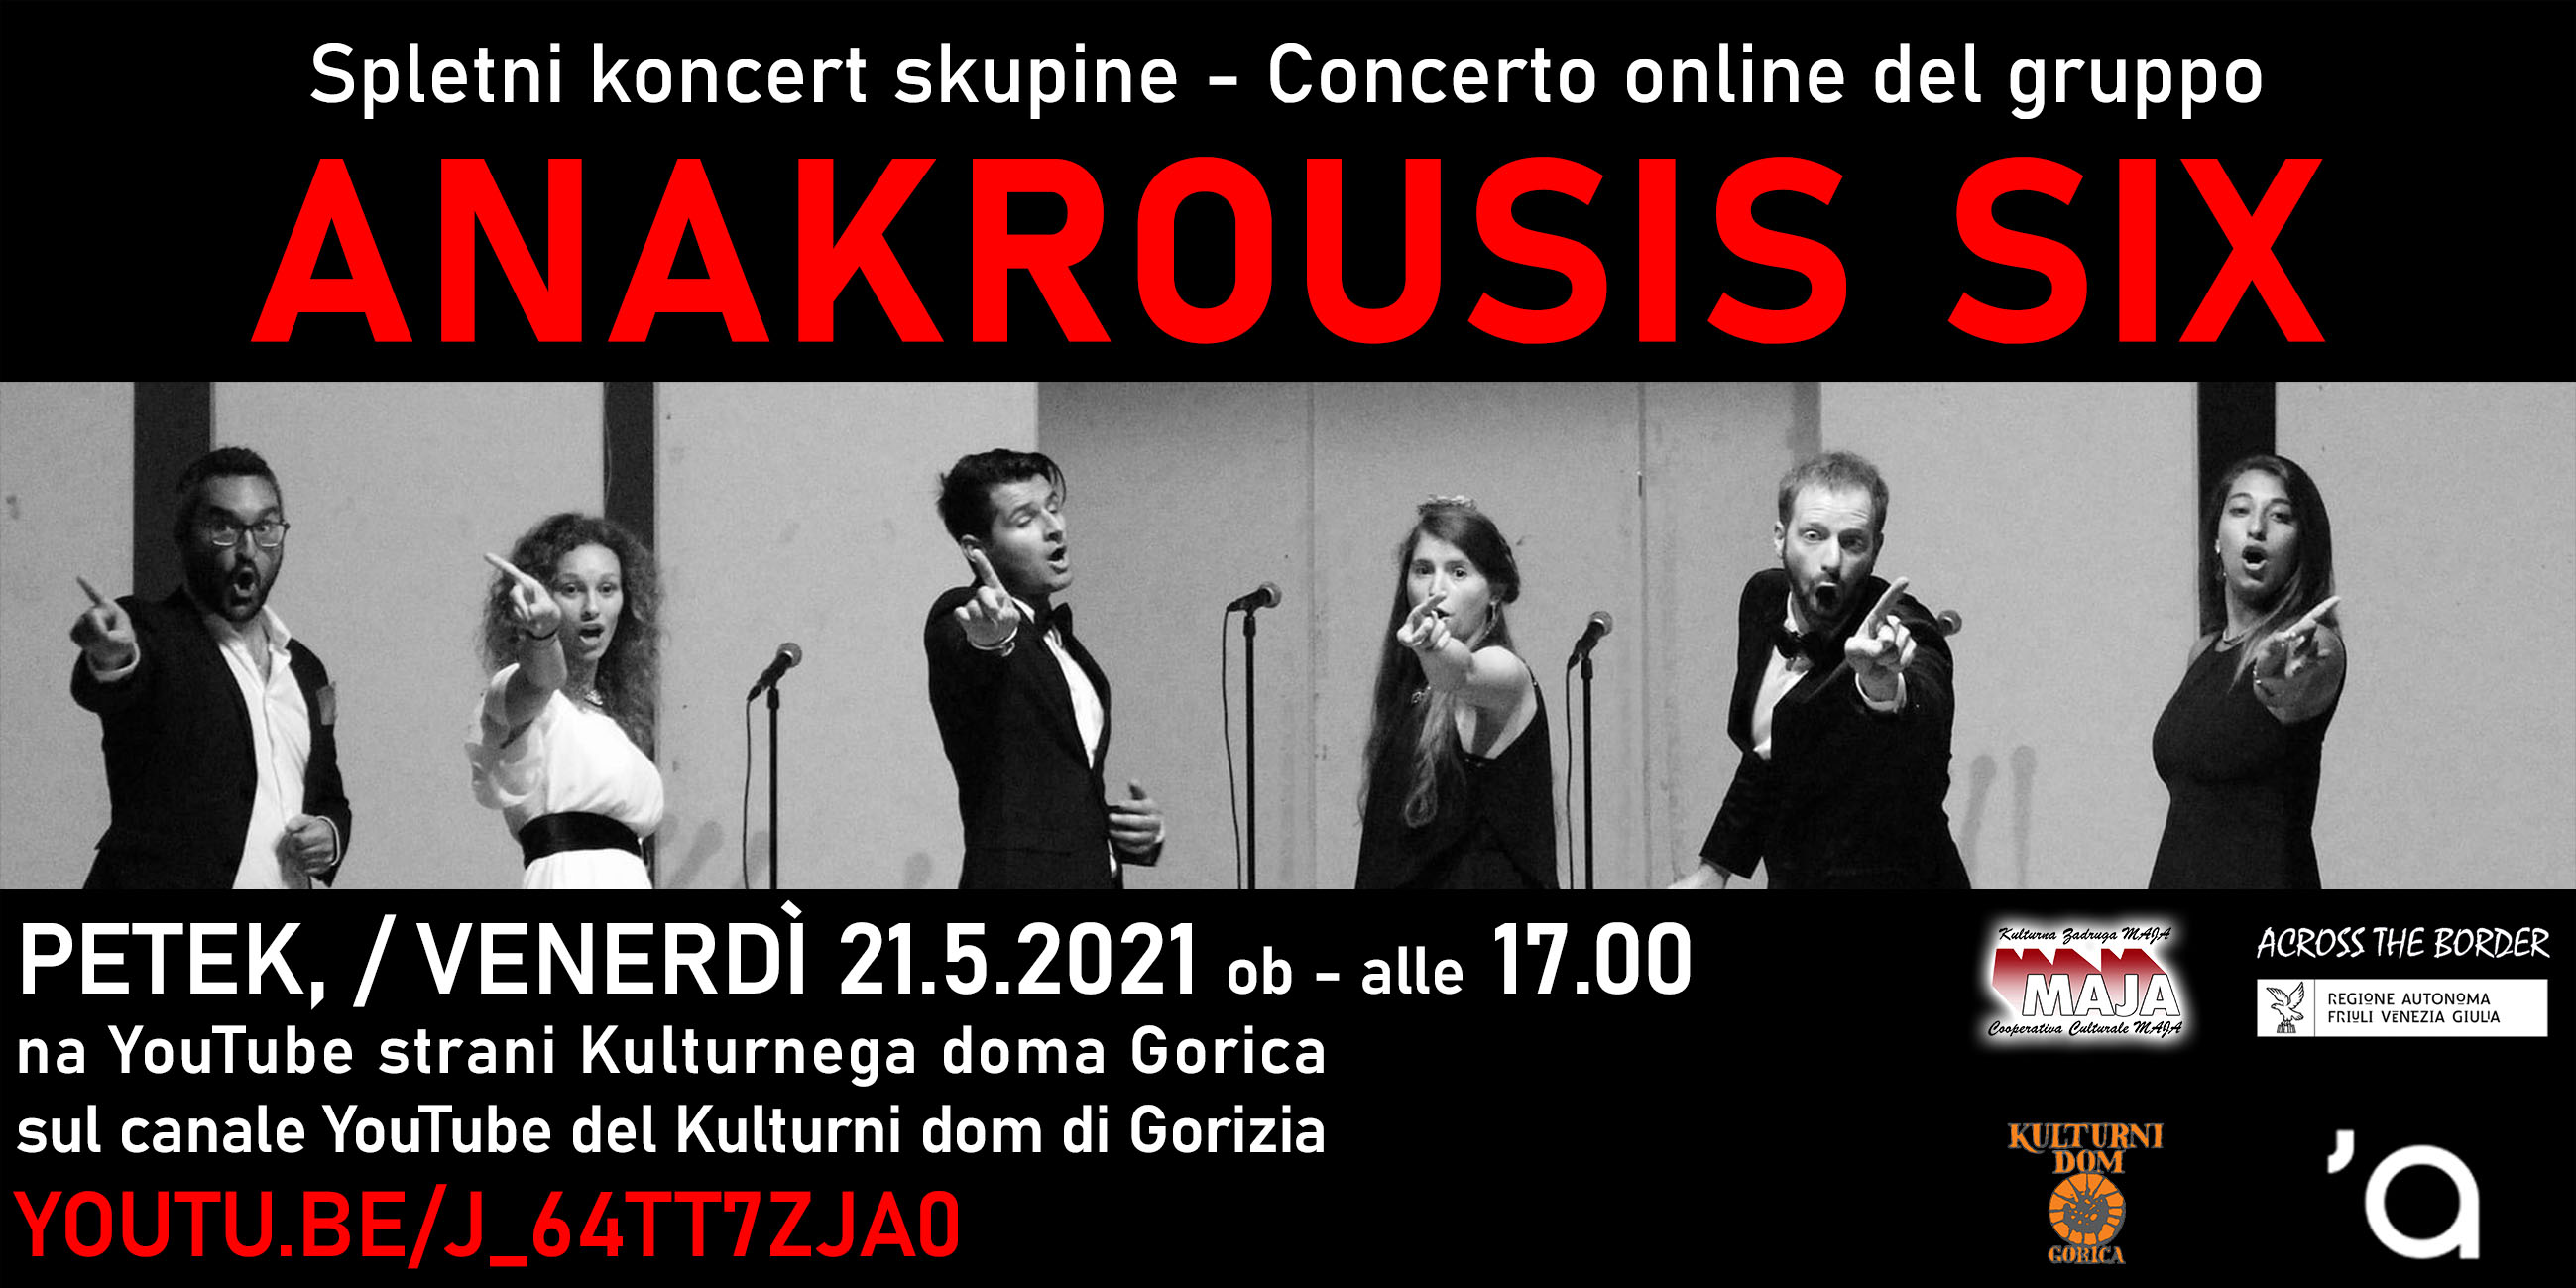 Anakrousis six in concert